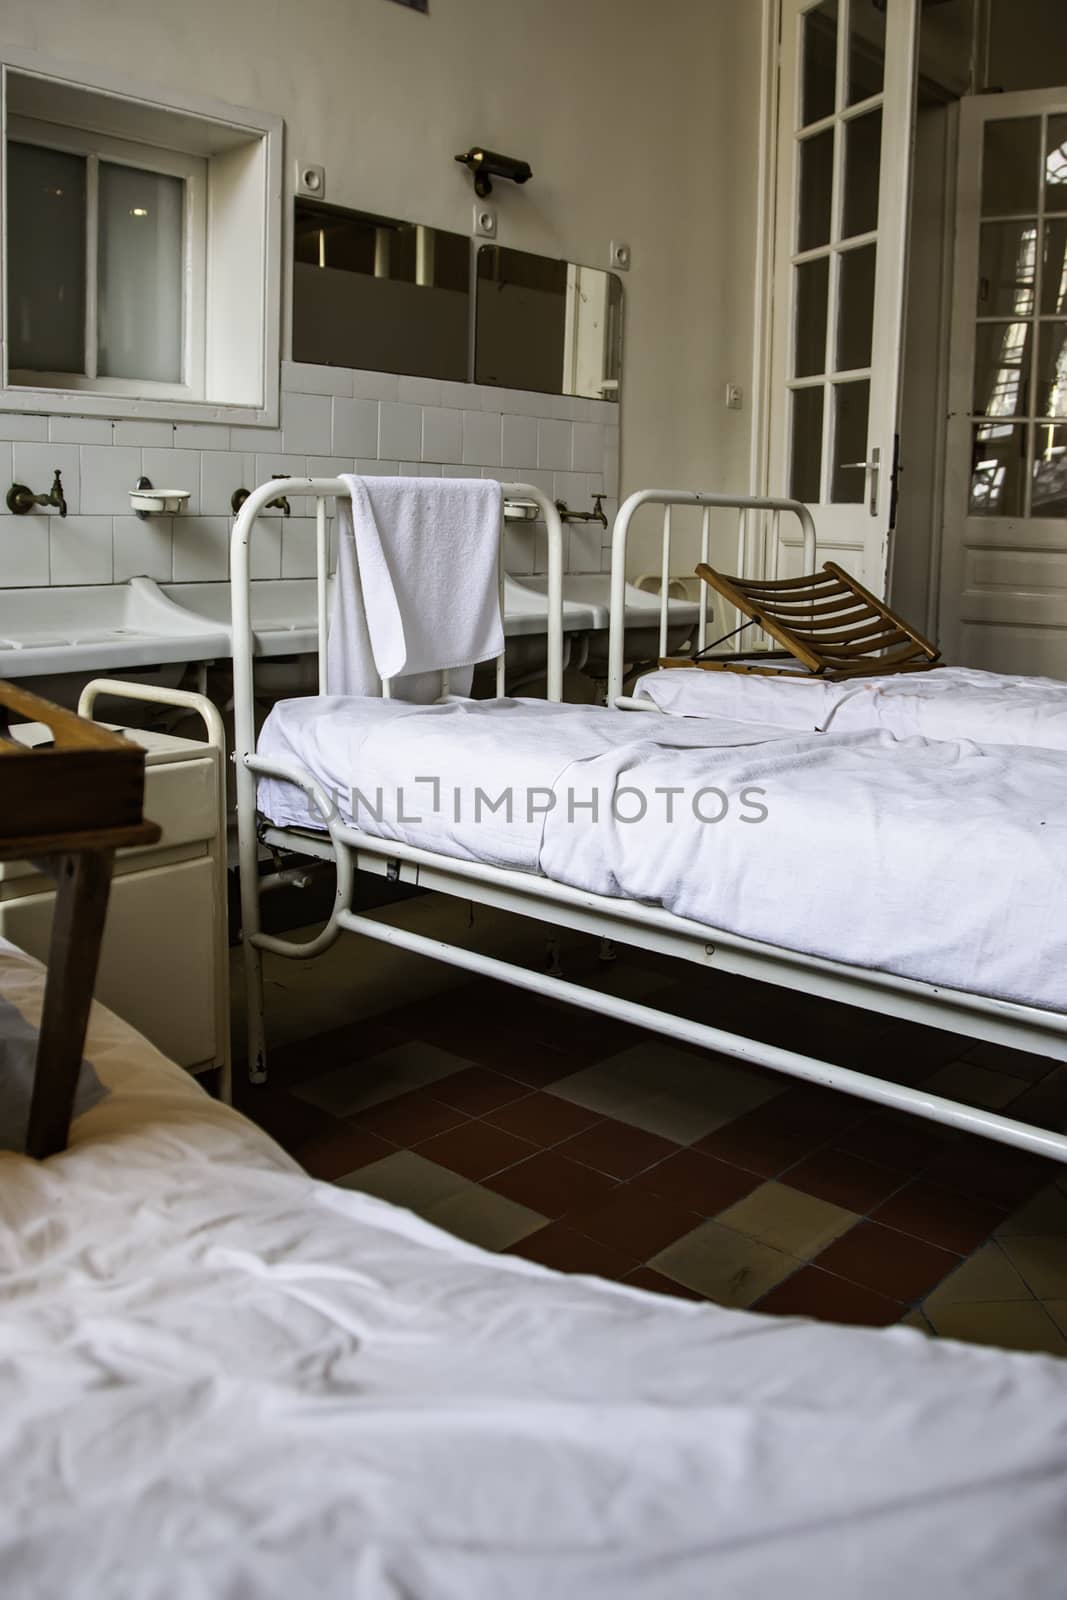 Old hospital beds, detail of old hospital for patients